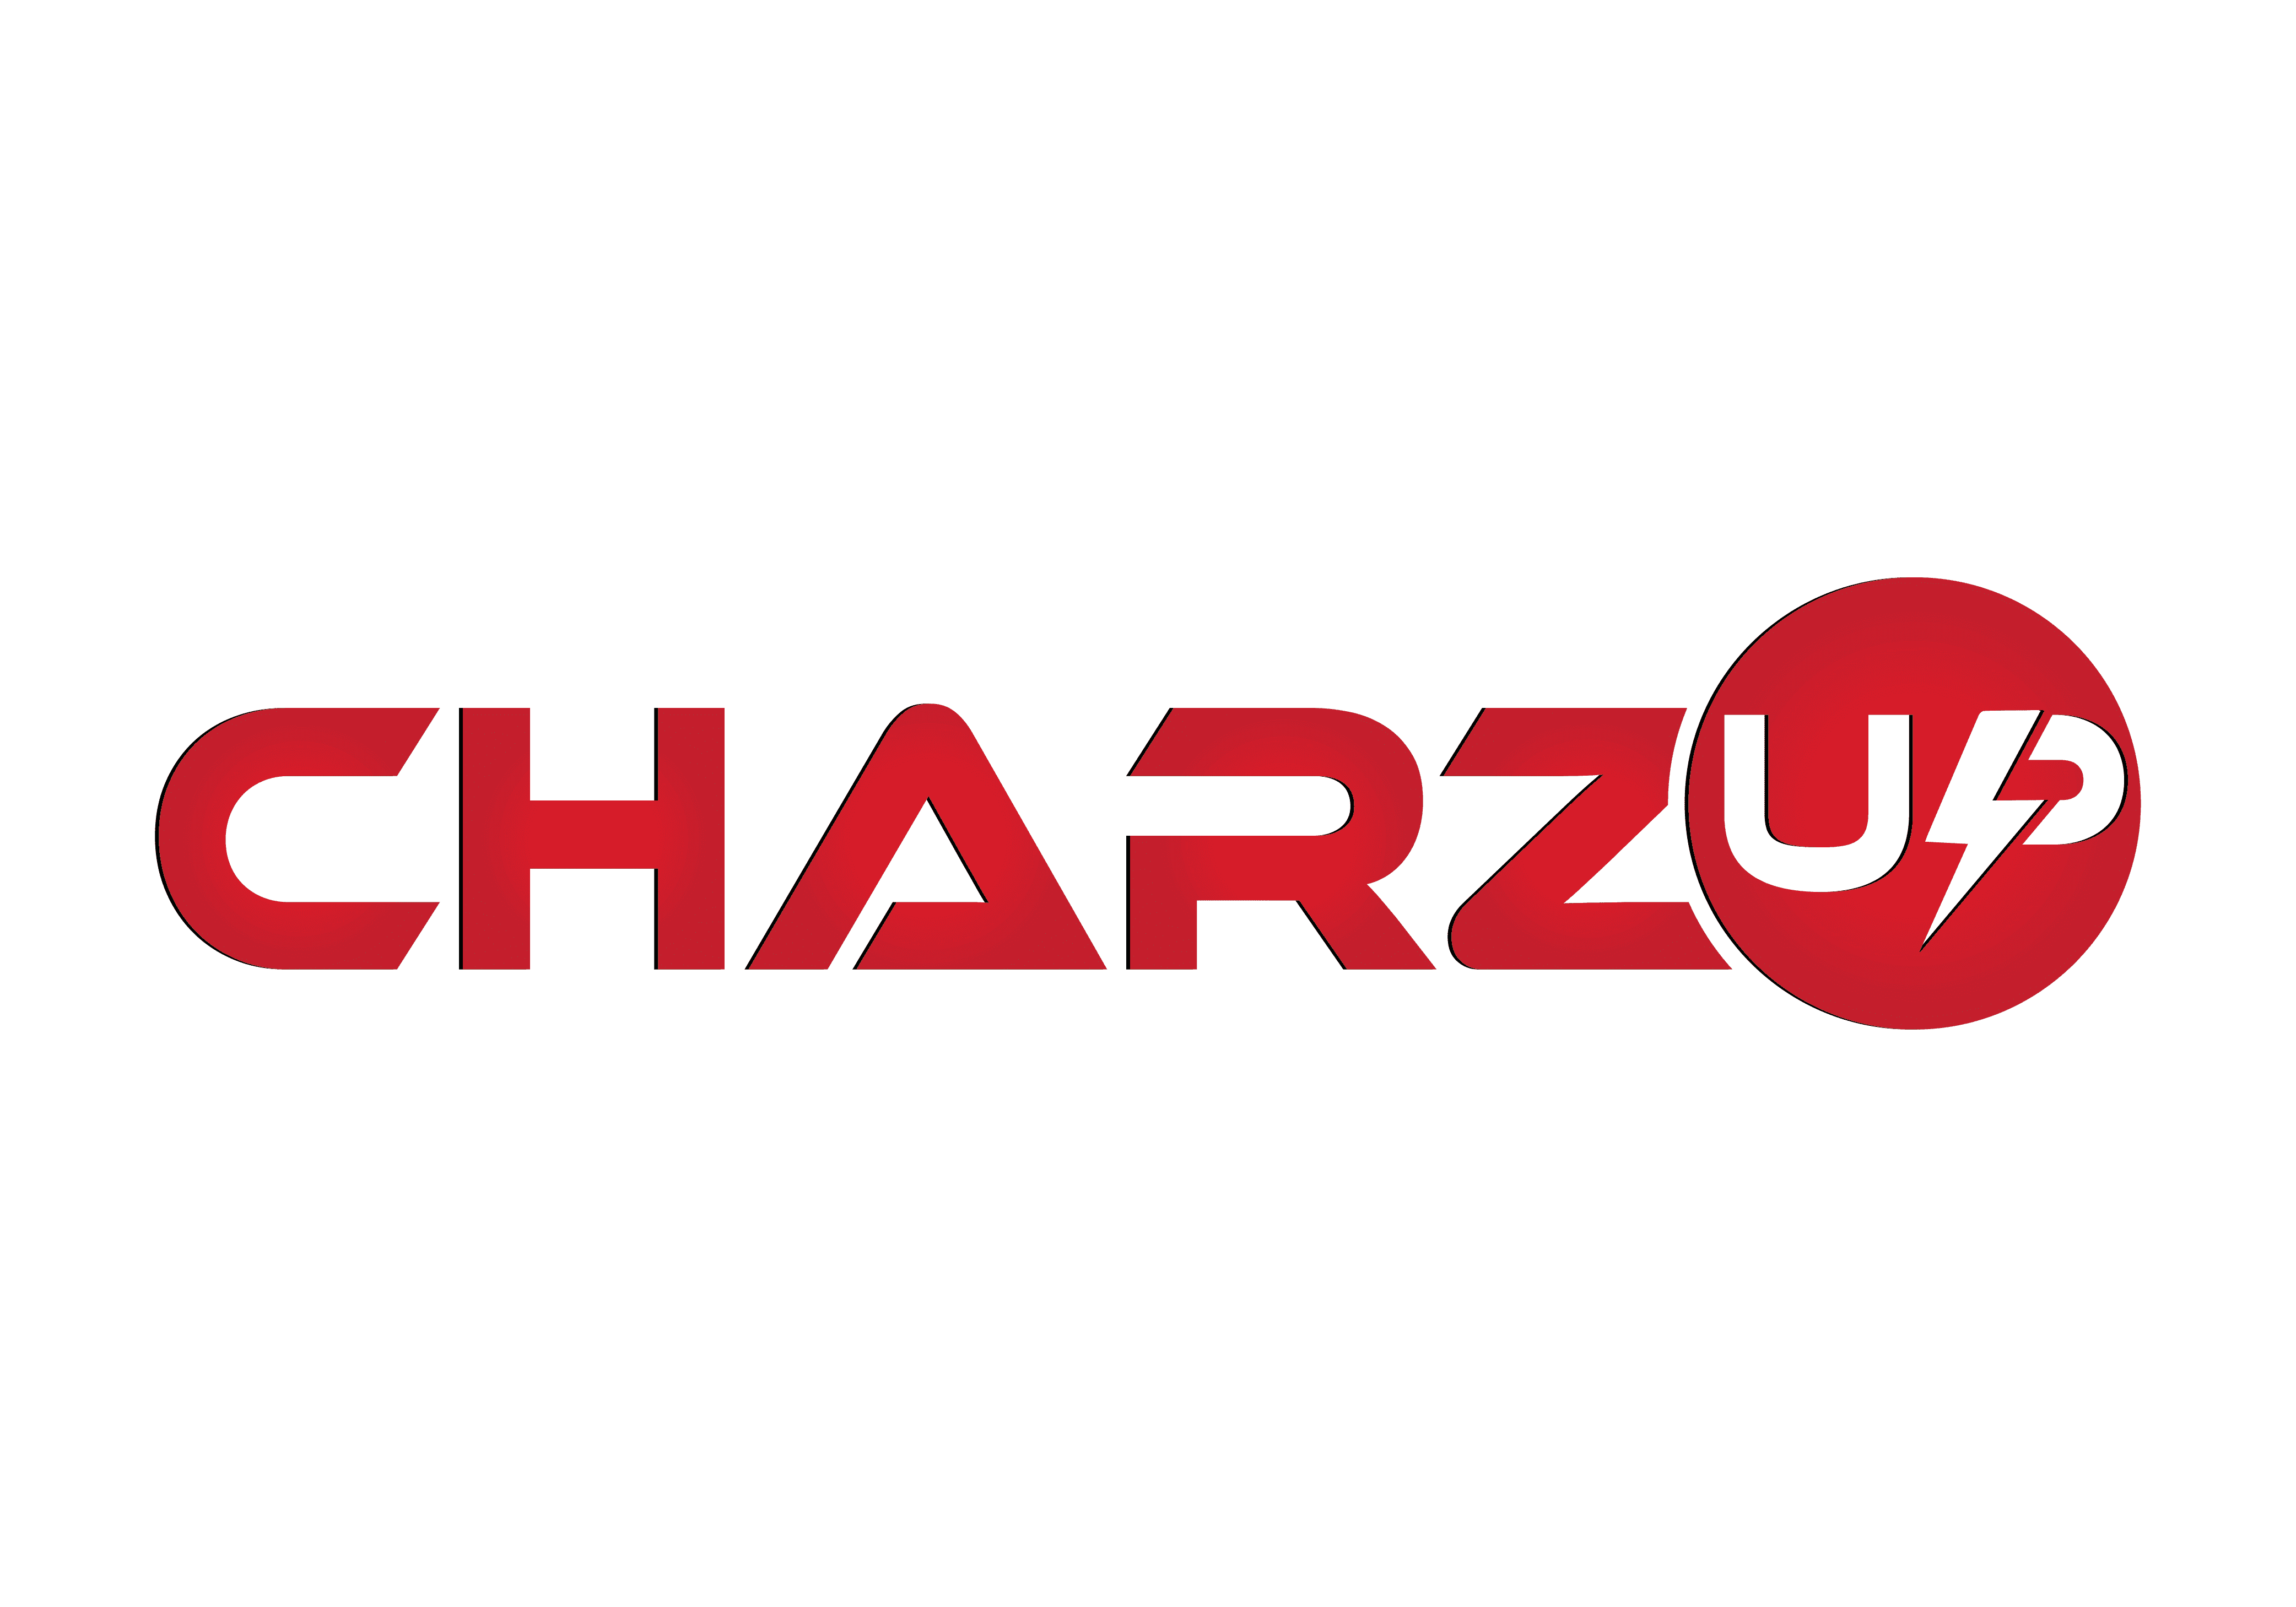 CharzUP